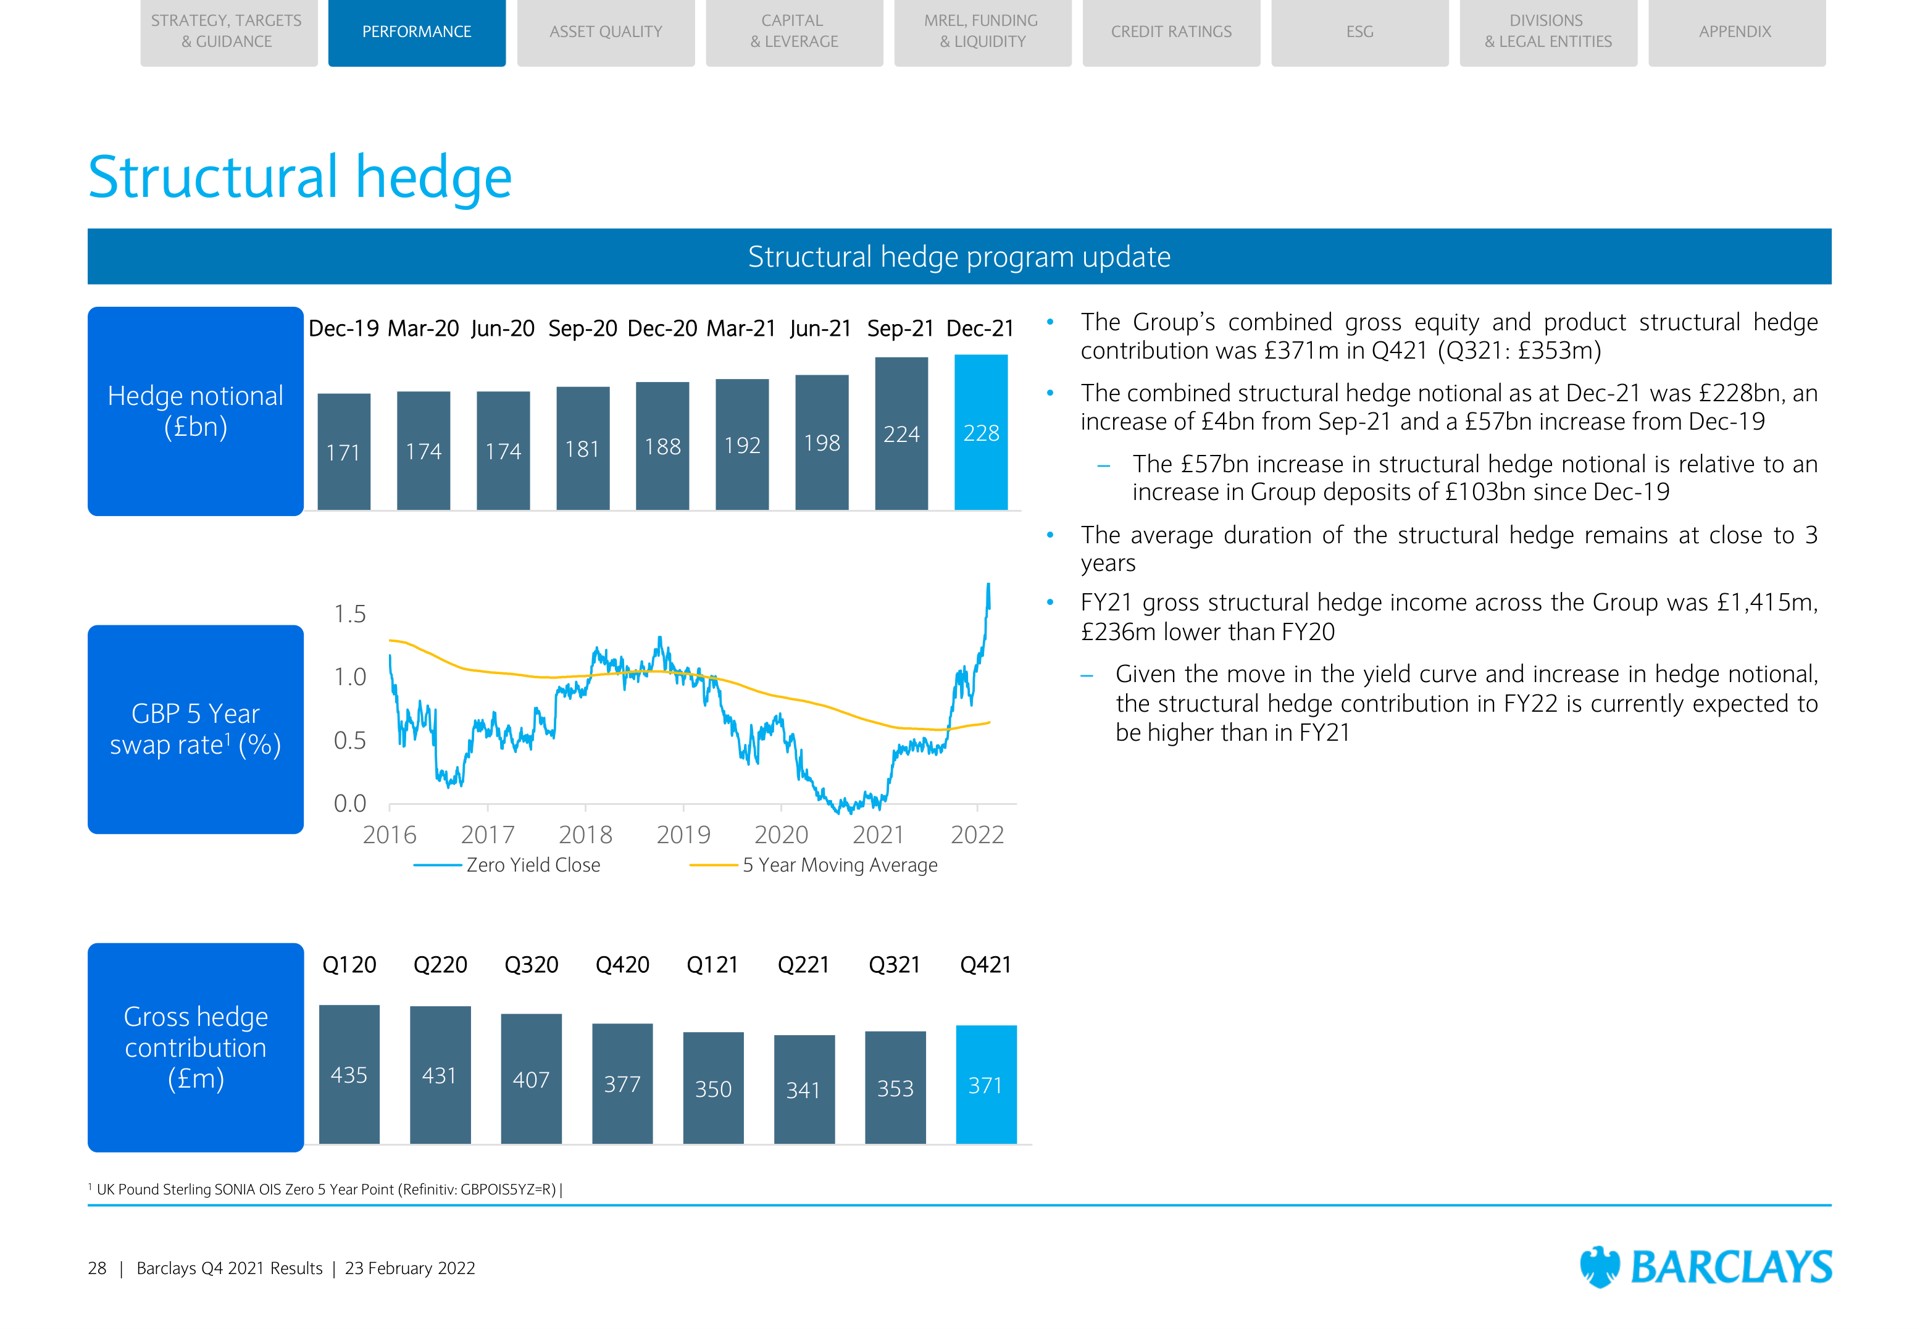 structural hedge structural hedge program update hedge notional year swap rate gross hedge contribution a bee coe gene ley | Barclays